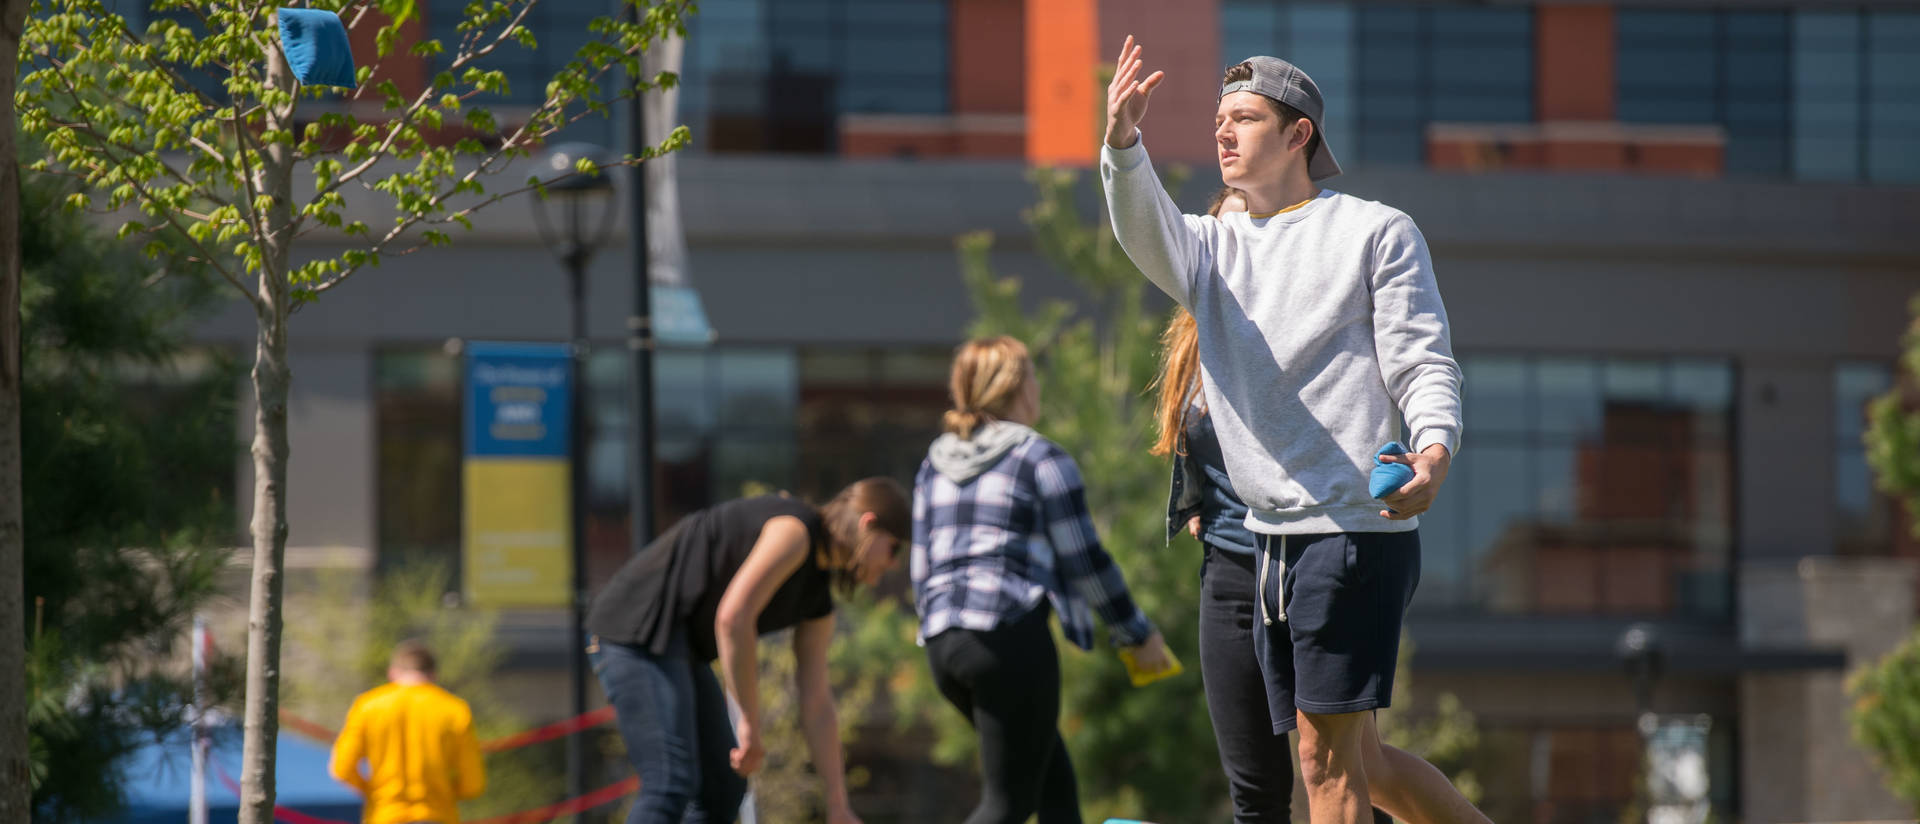 Male student tossing bags for bean bag game on campus mall, spring